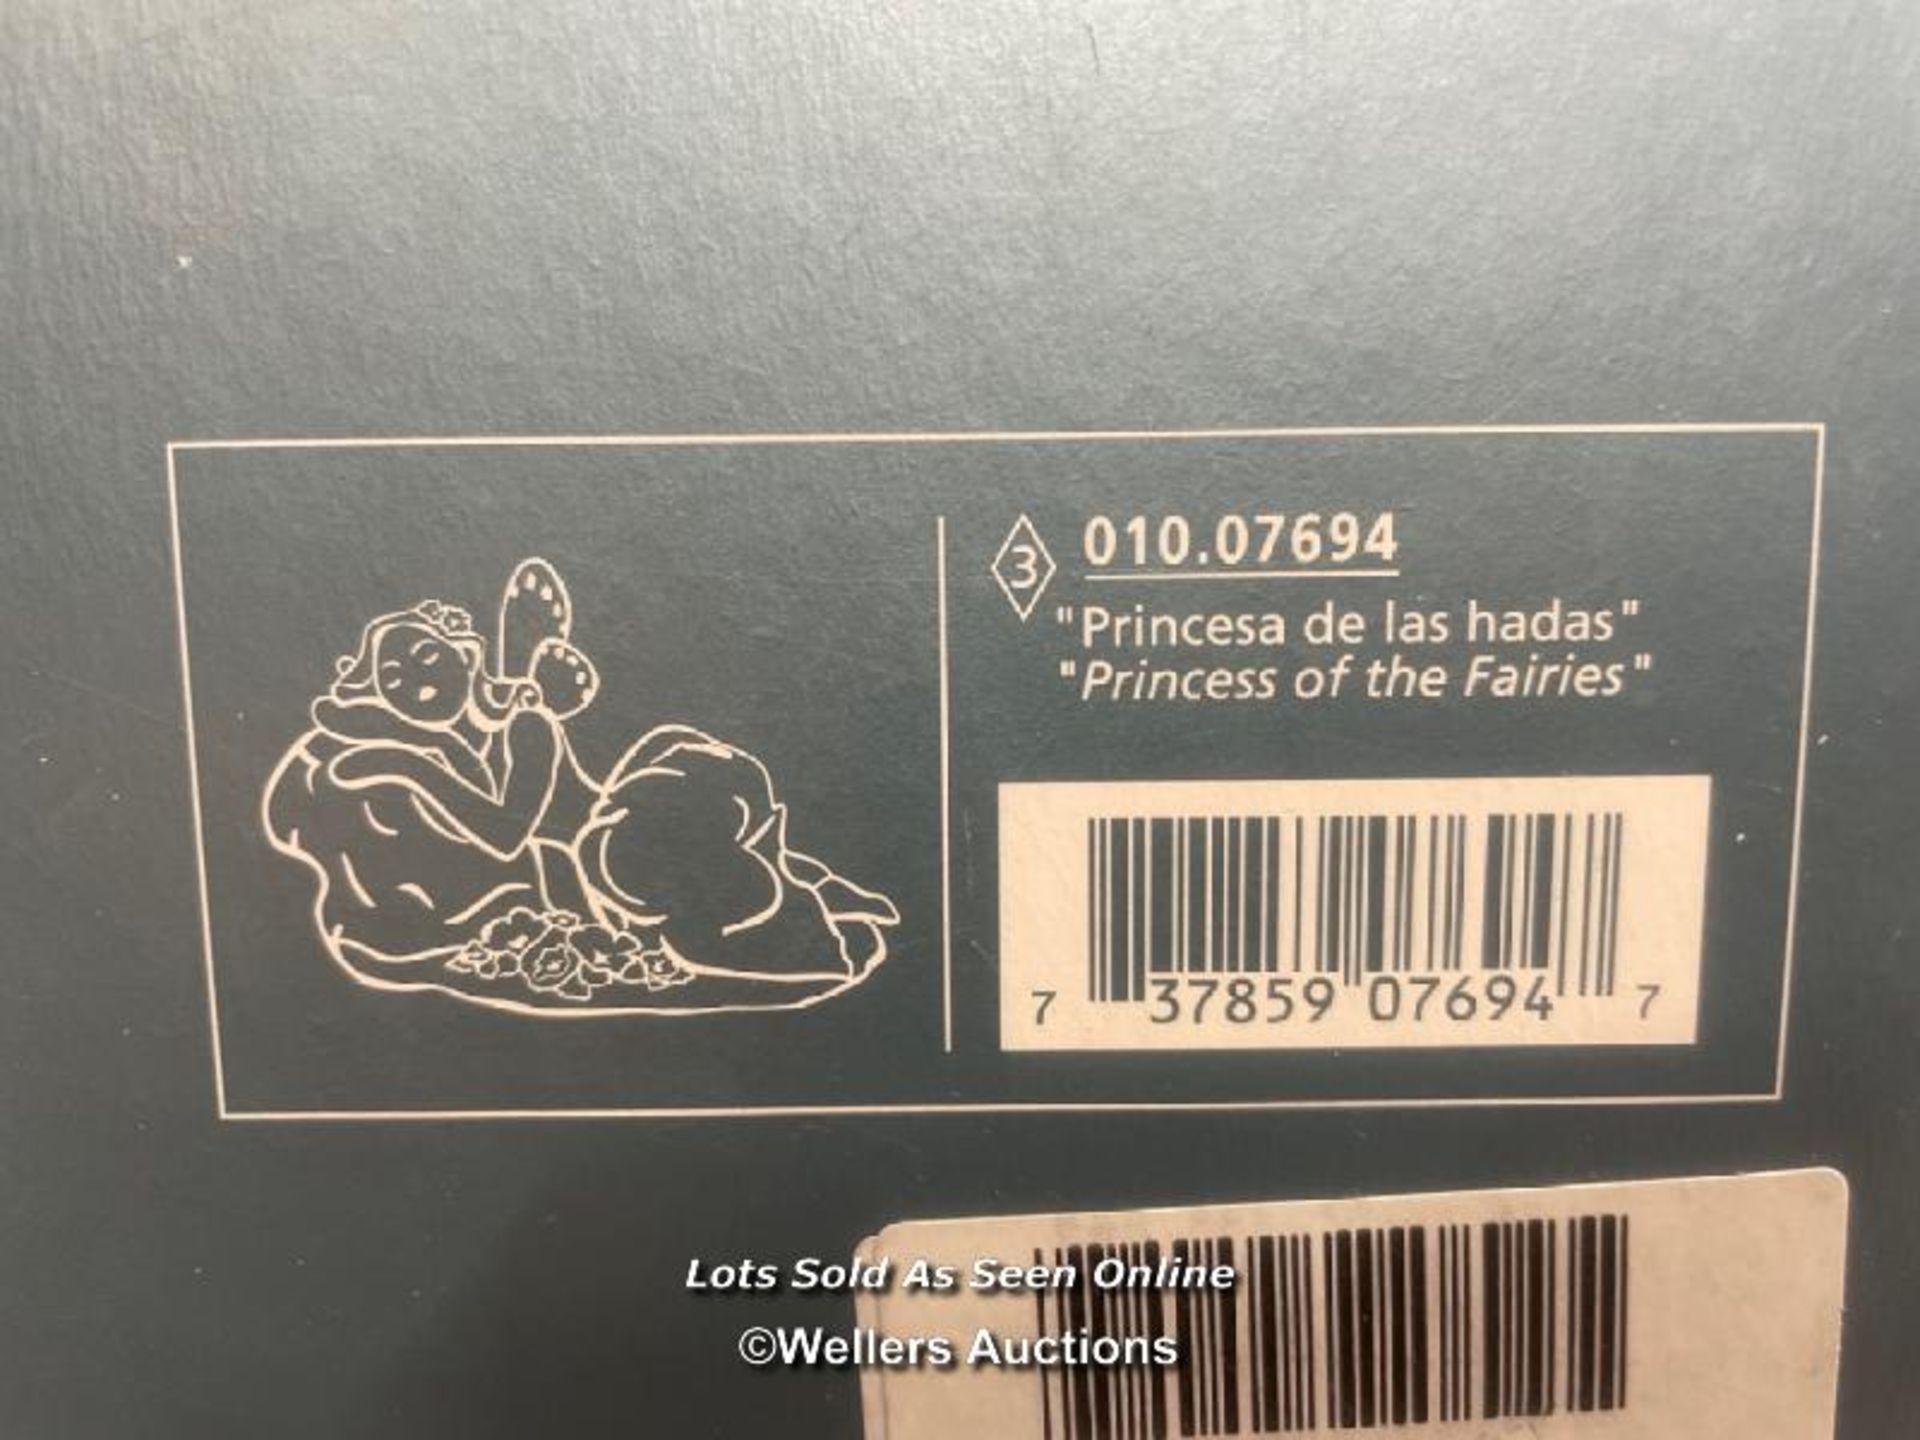 LLADRO PRIVILEGE COLLECTION "PRINCESS OF THE FAIRIES" NO. 010.07694, BOXED - Image 10 of 10